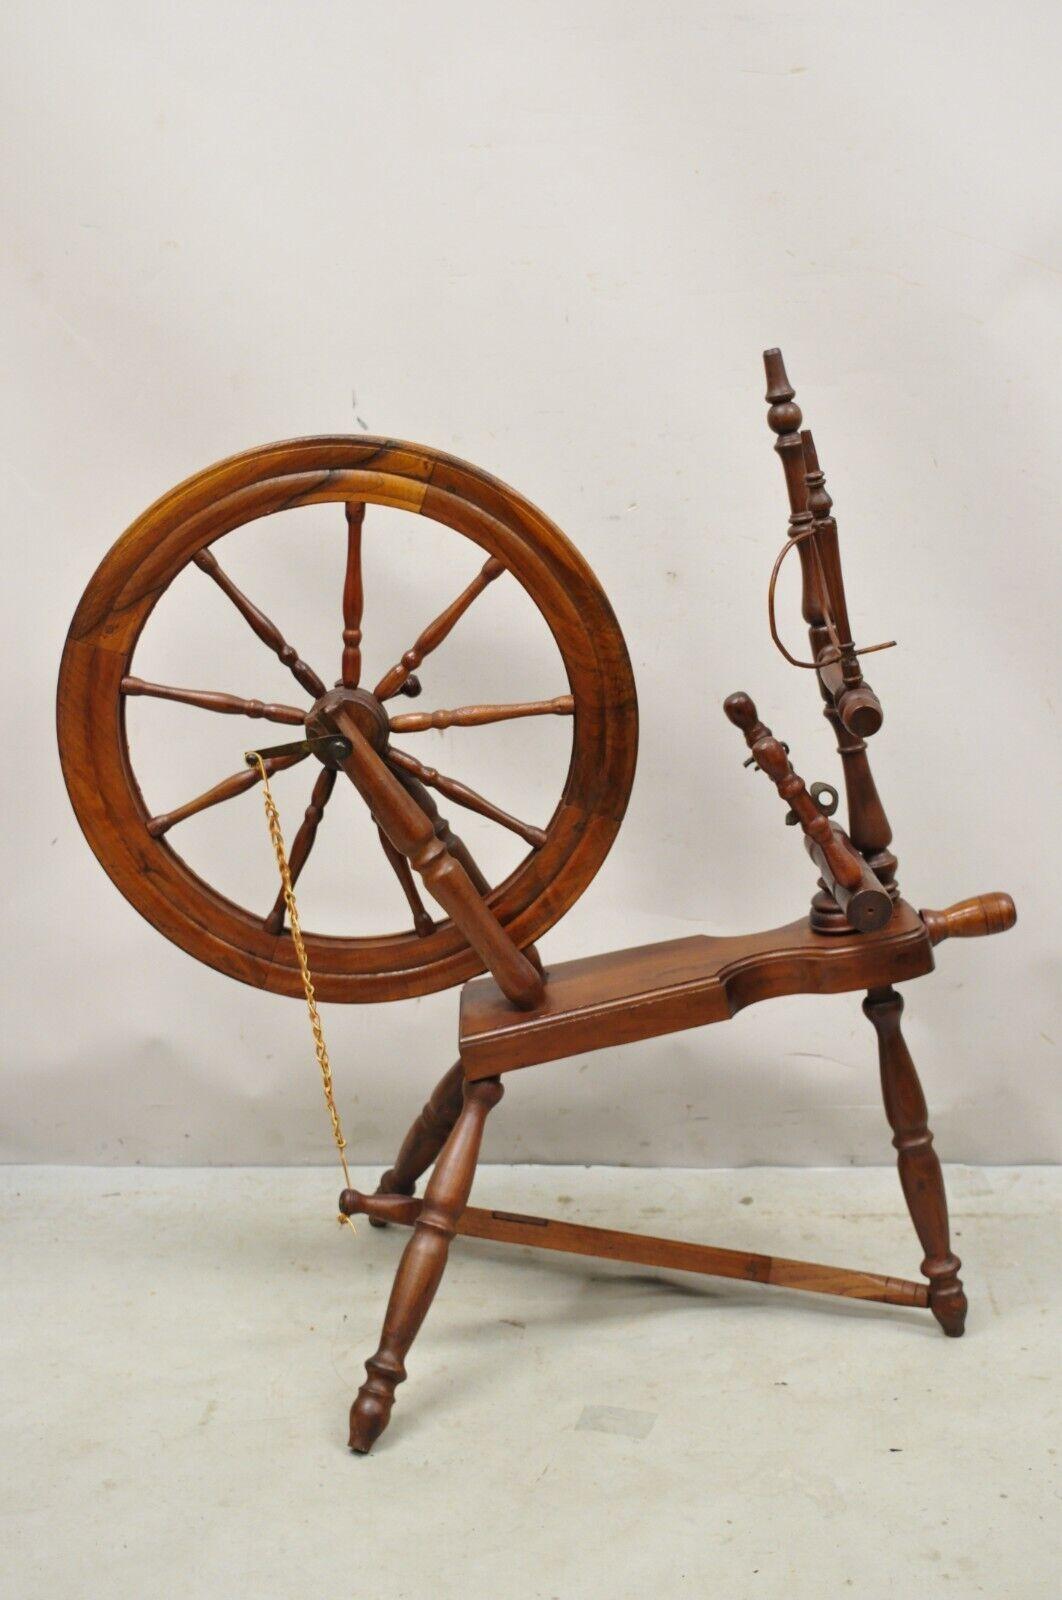 Antique Canadian Country Primitive Wooden Colonial Spinning Wheel. Item features 22